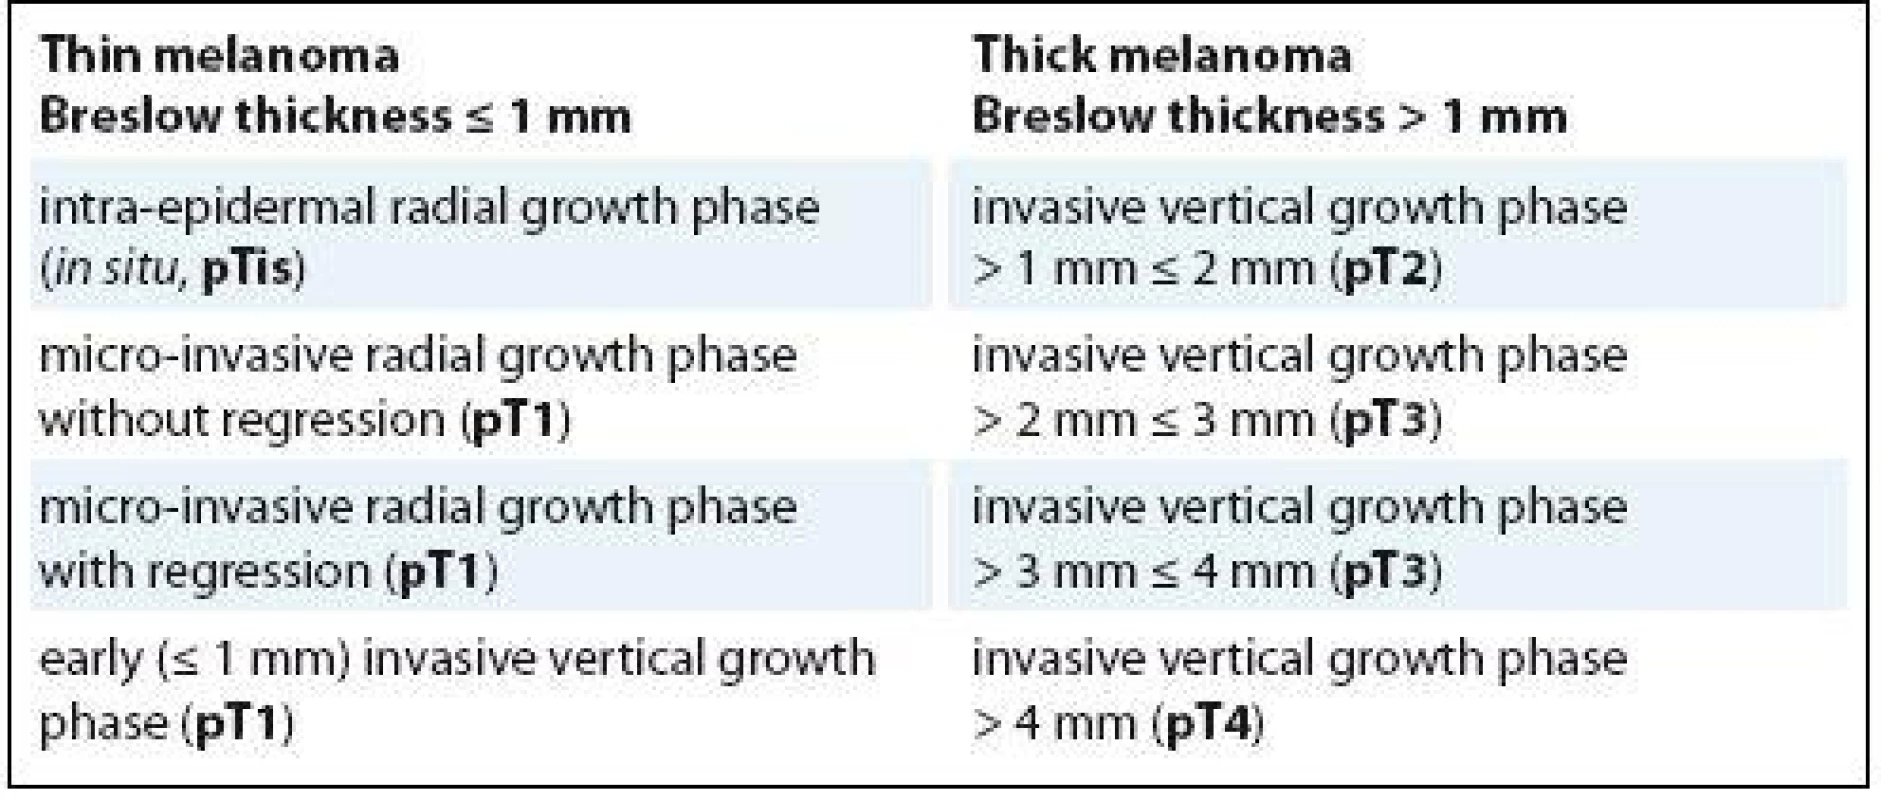 The malignant melanocytic lesions of the skin can be subdivided, according to the Breslow thickness, in thin melanoma (≤ 1 mm) or thick melanoma (> 1 mm).